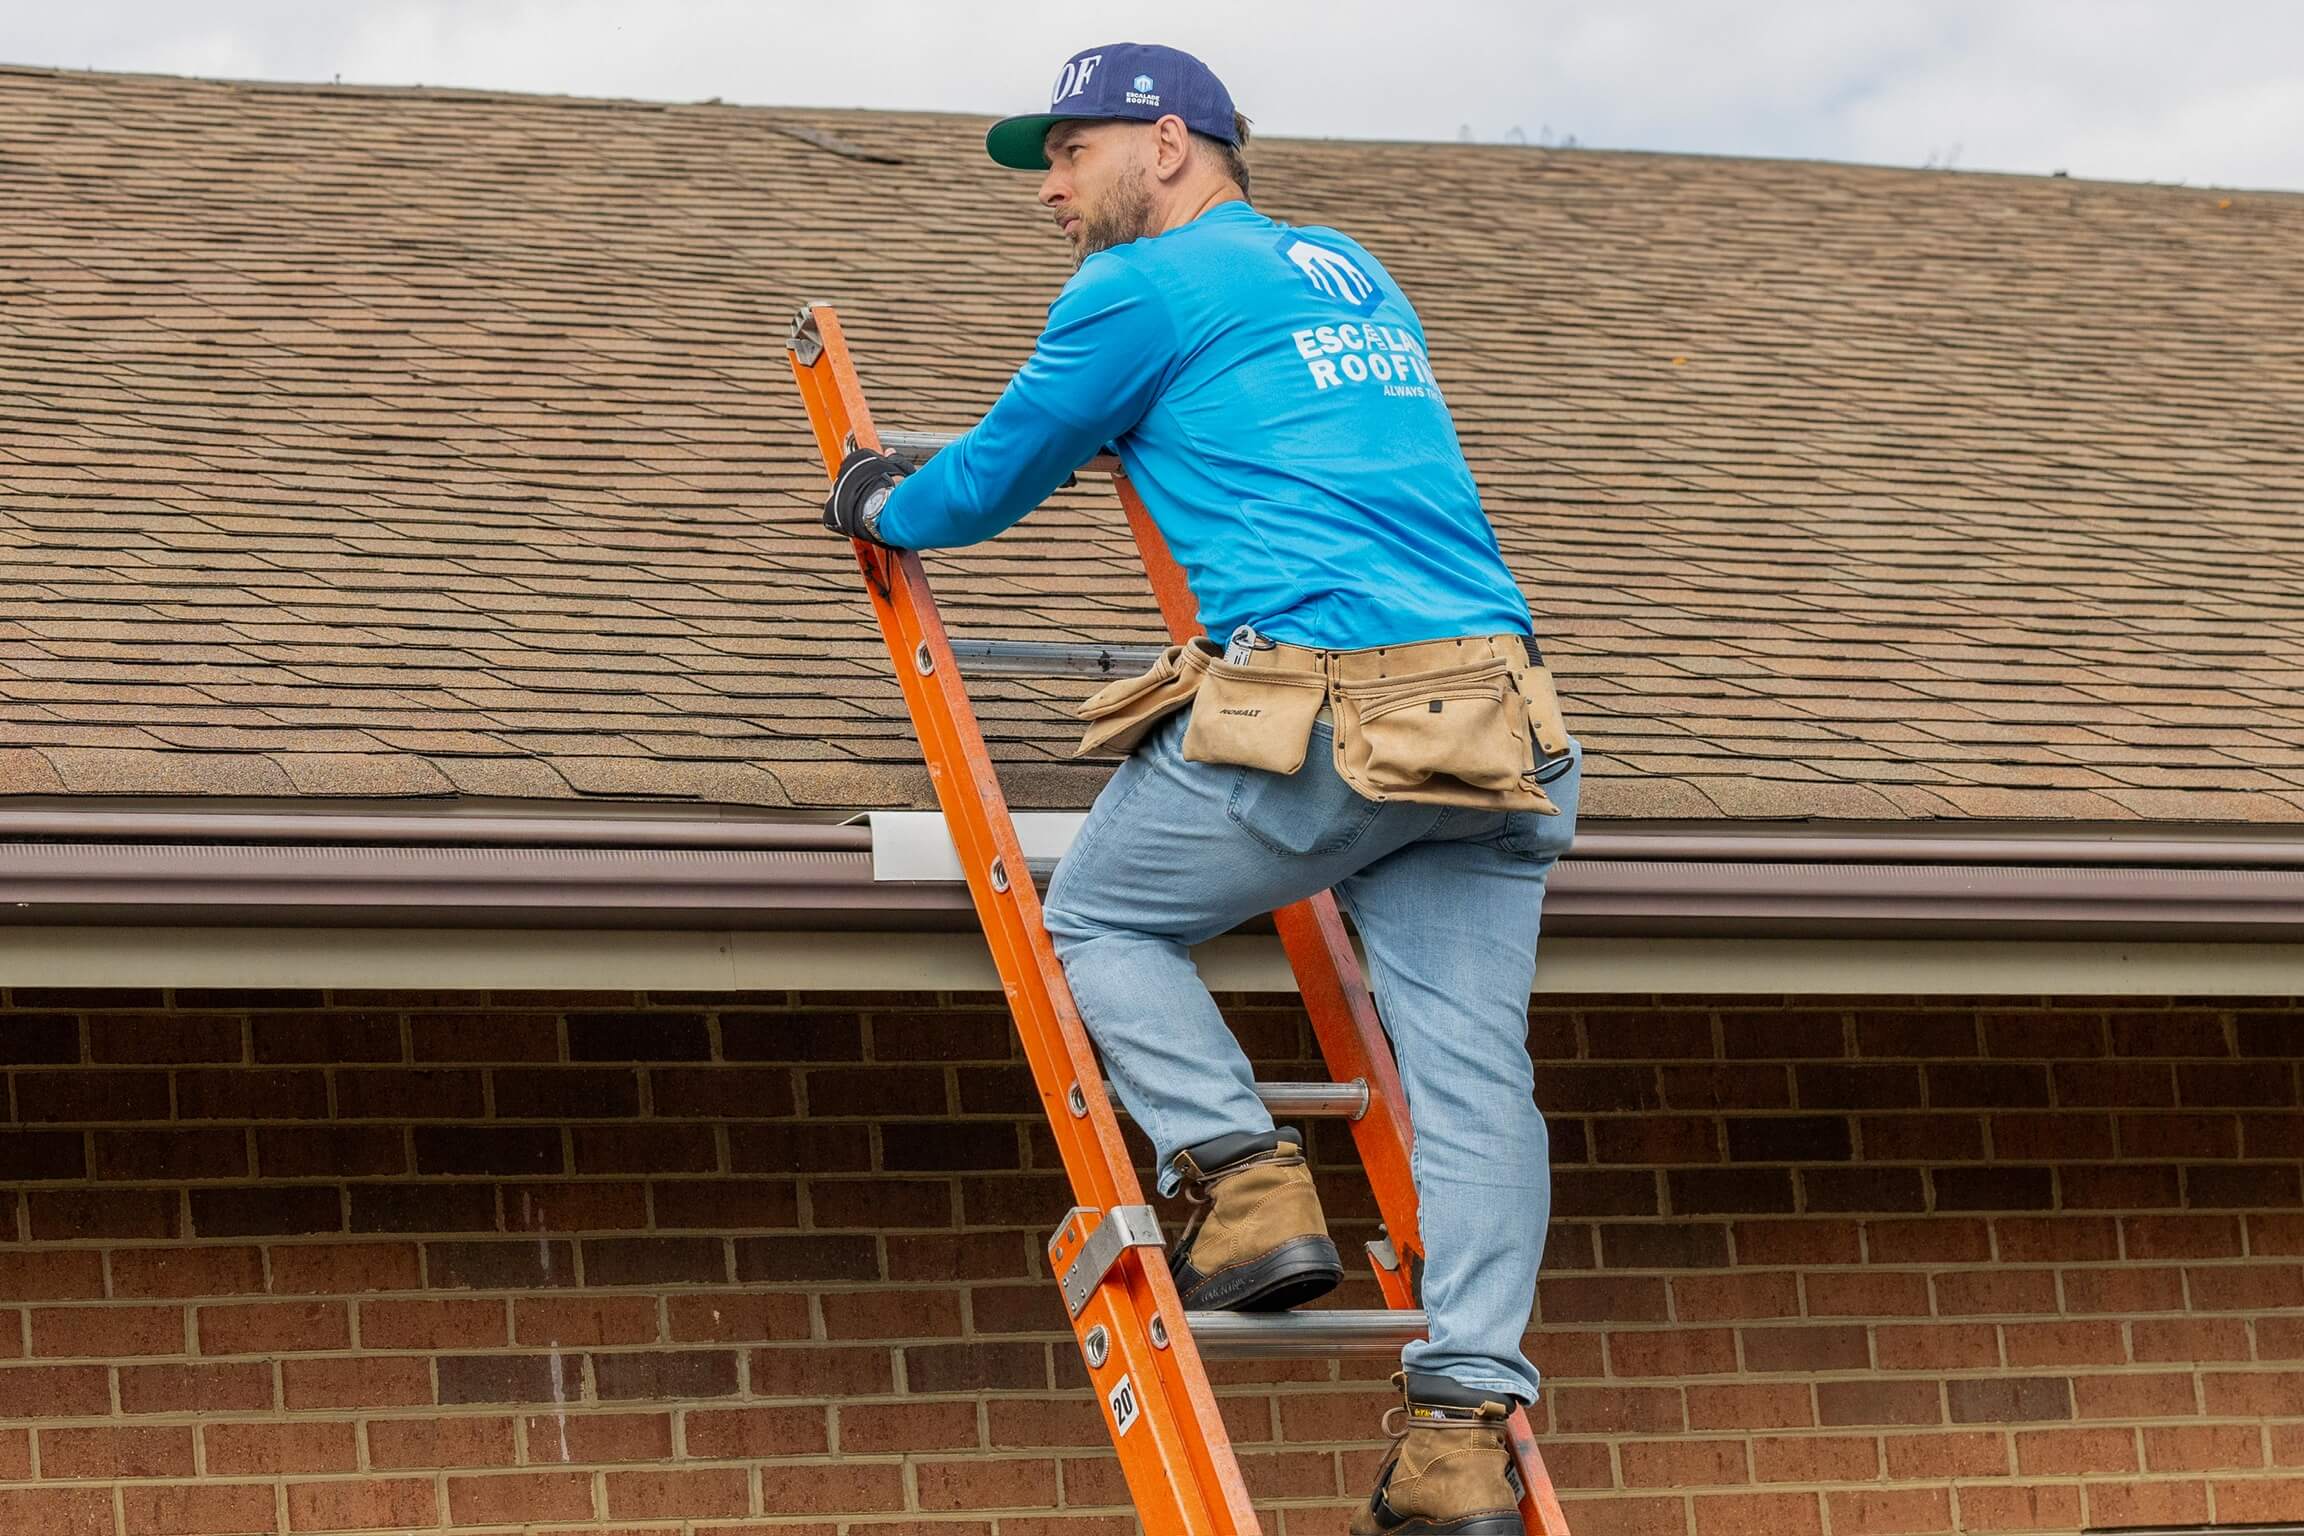 Escalade Roofing Professional Roofer Climbing Ladder - Asheboro Nc